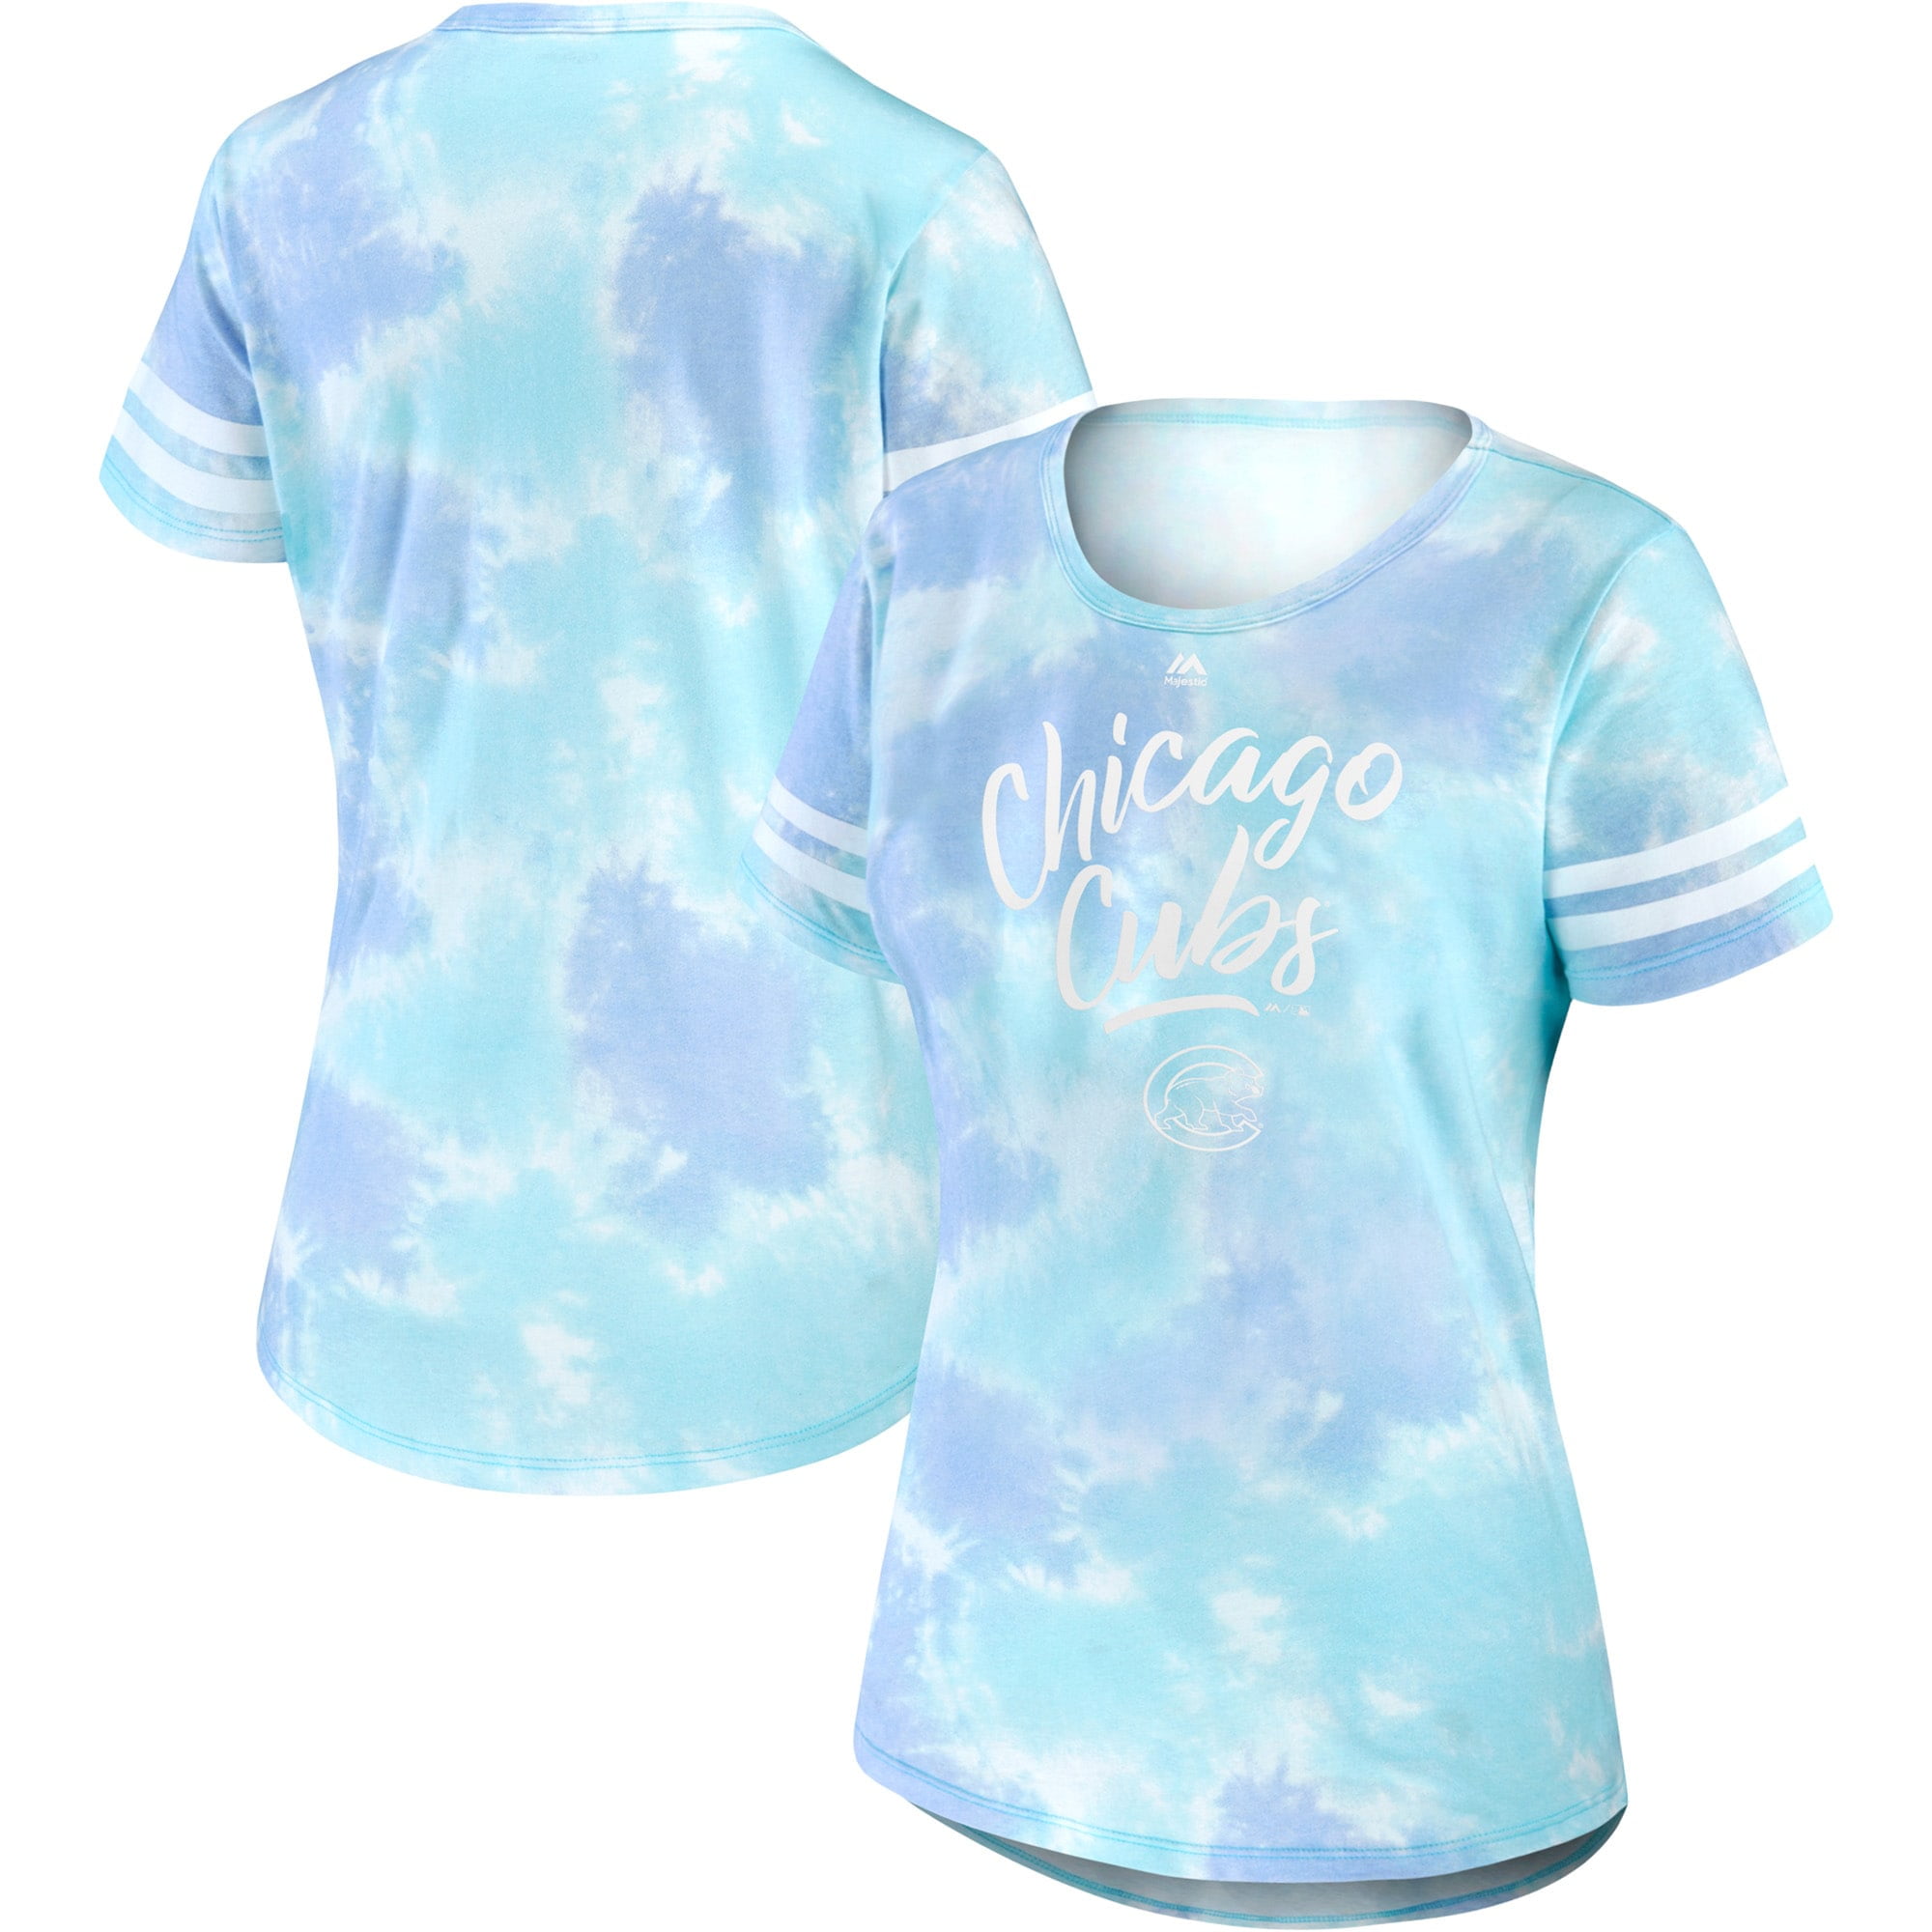 Women's Majestic Light Blue Chicago Cubs Hustle and Win Scoop Neck T-Shirt  